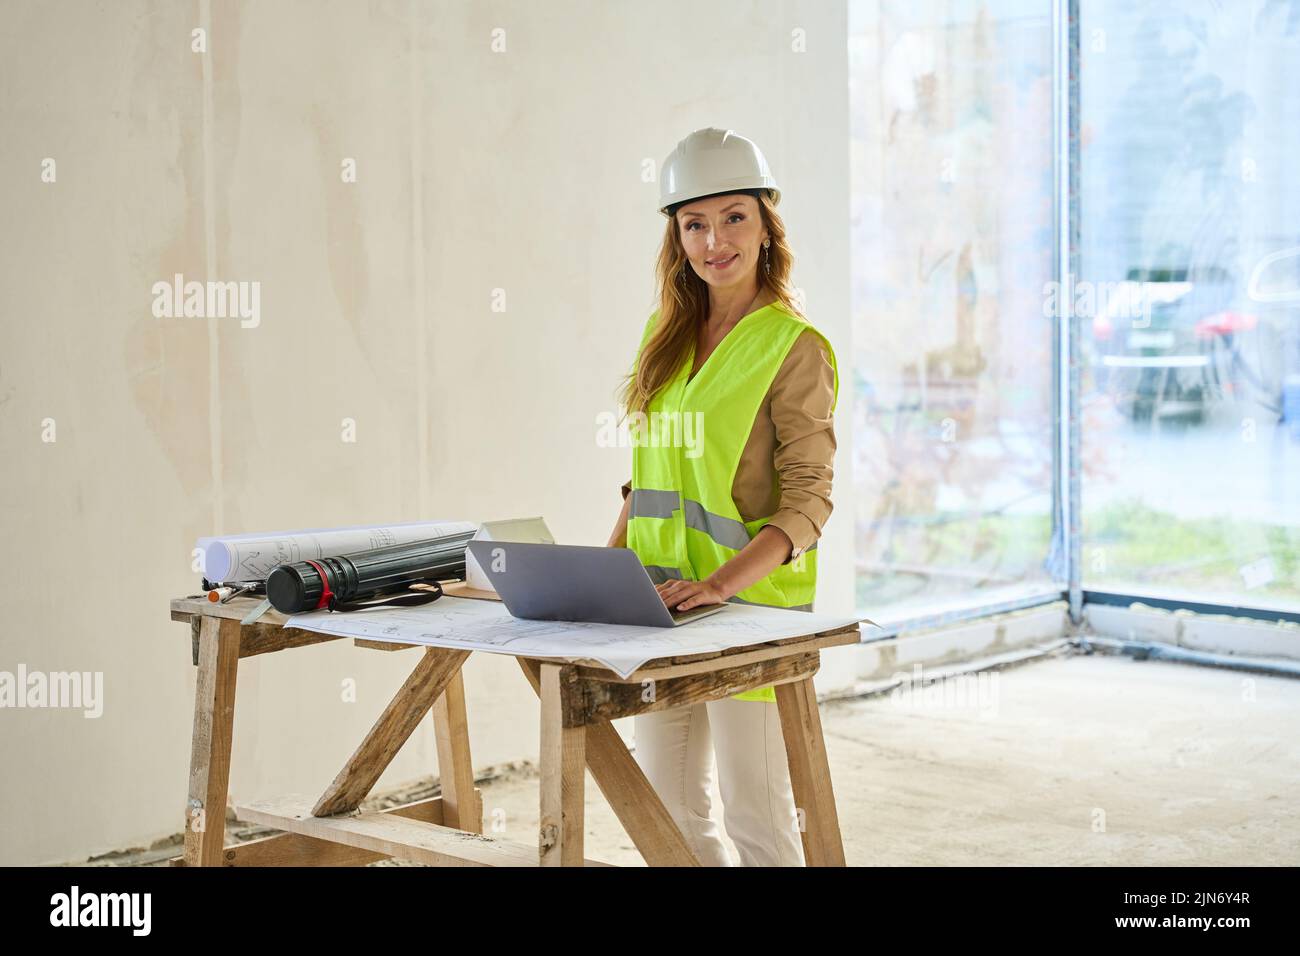 Real estate agent standing near table with laptop and blueprints Stock Photo